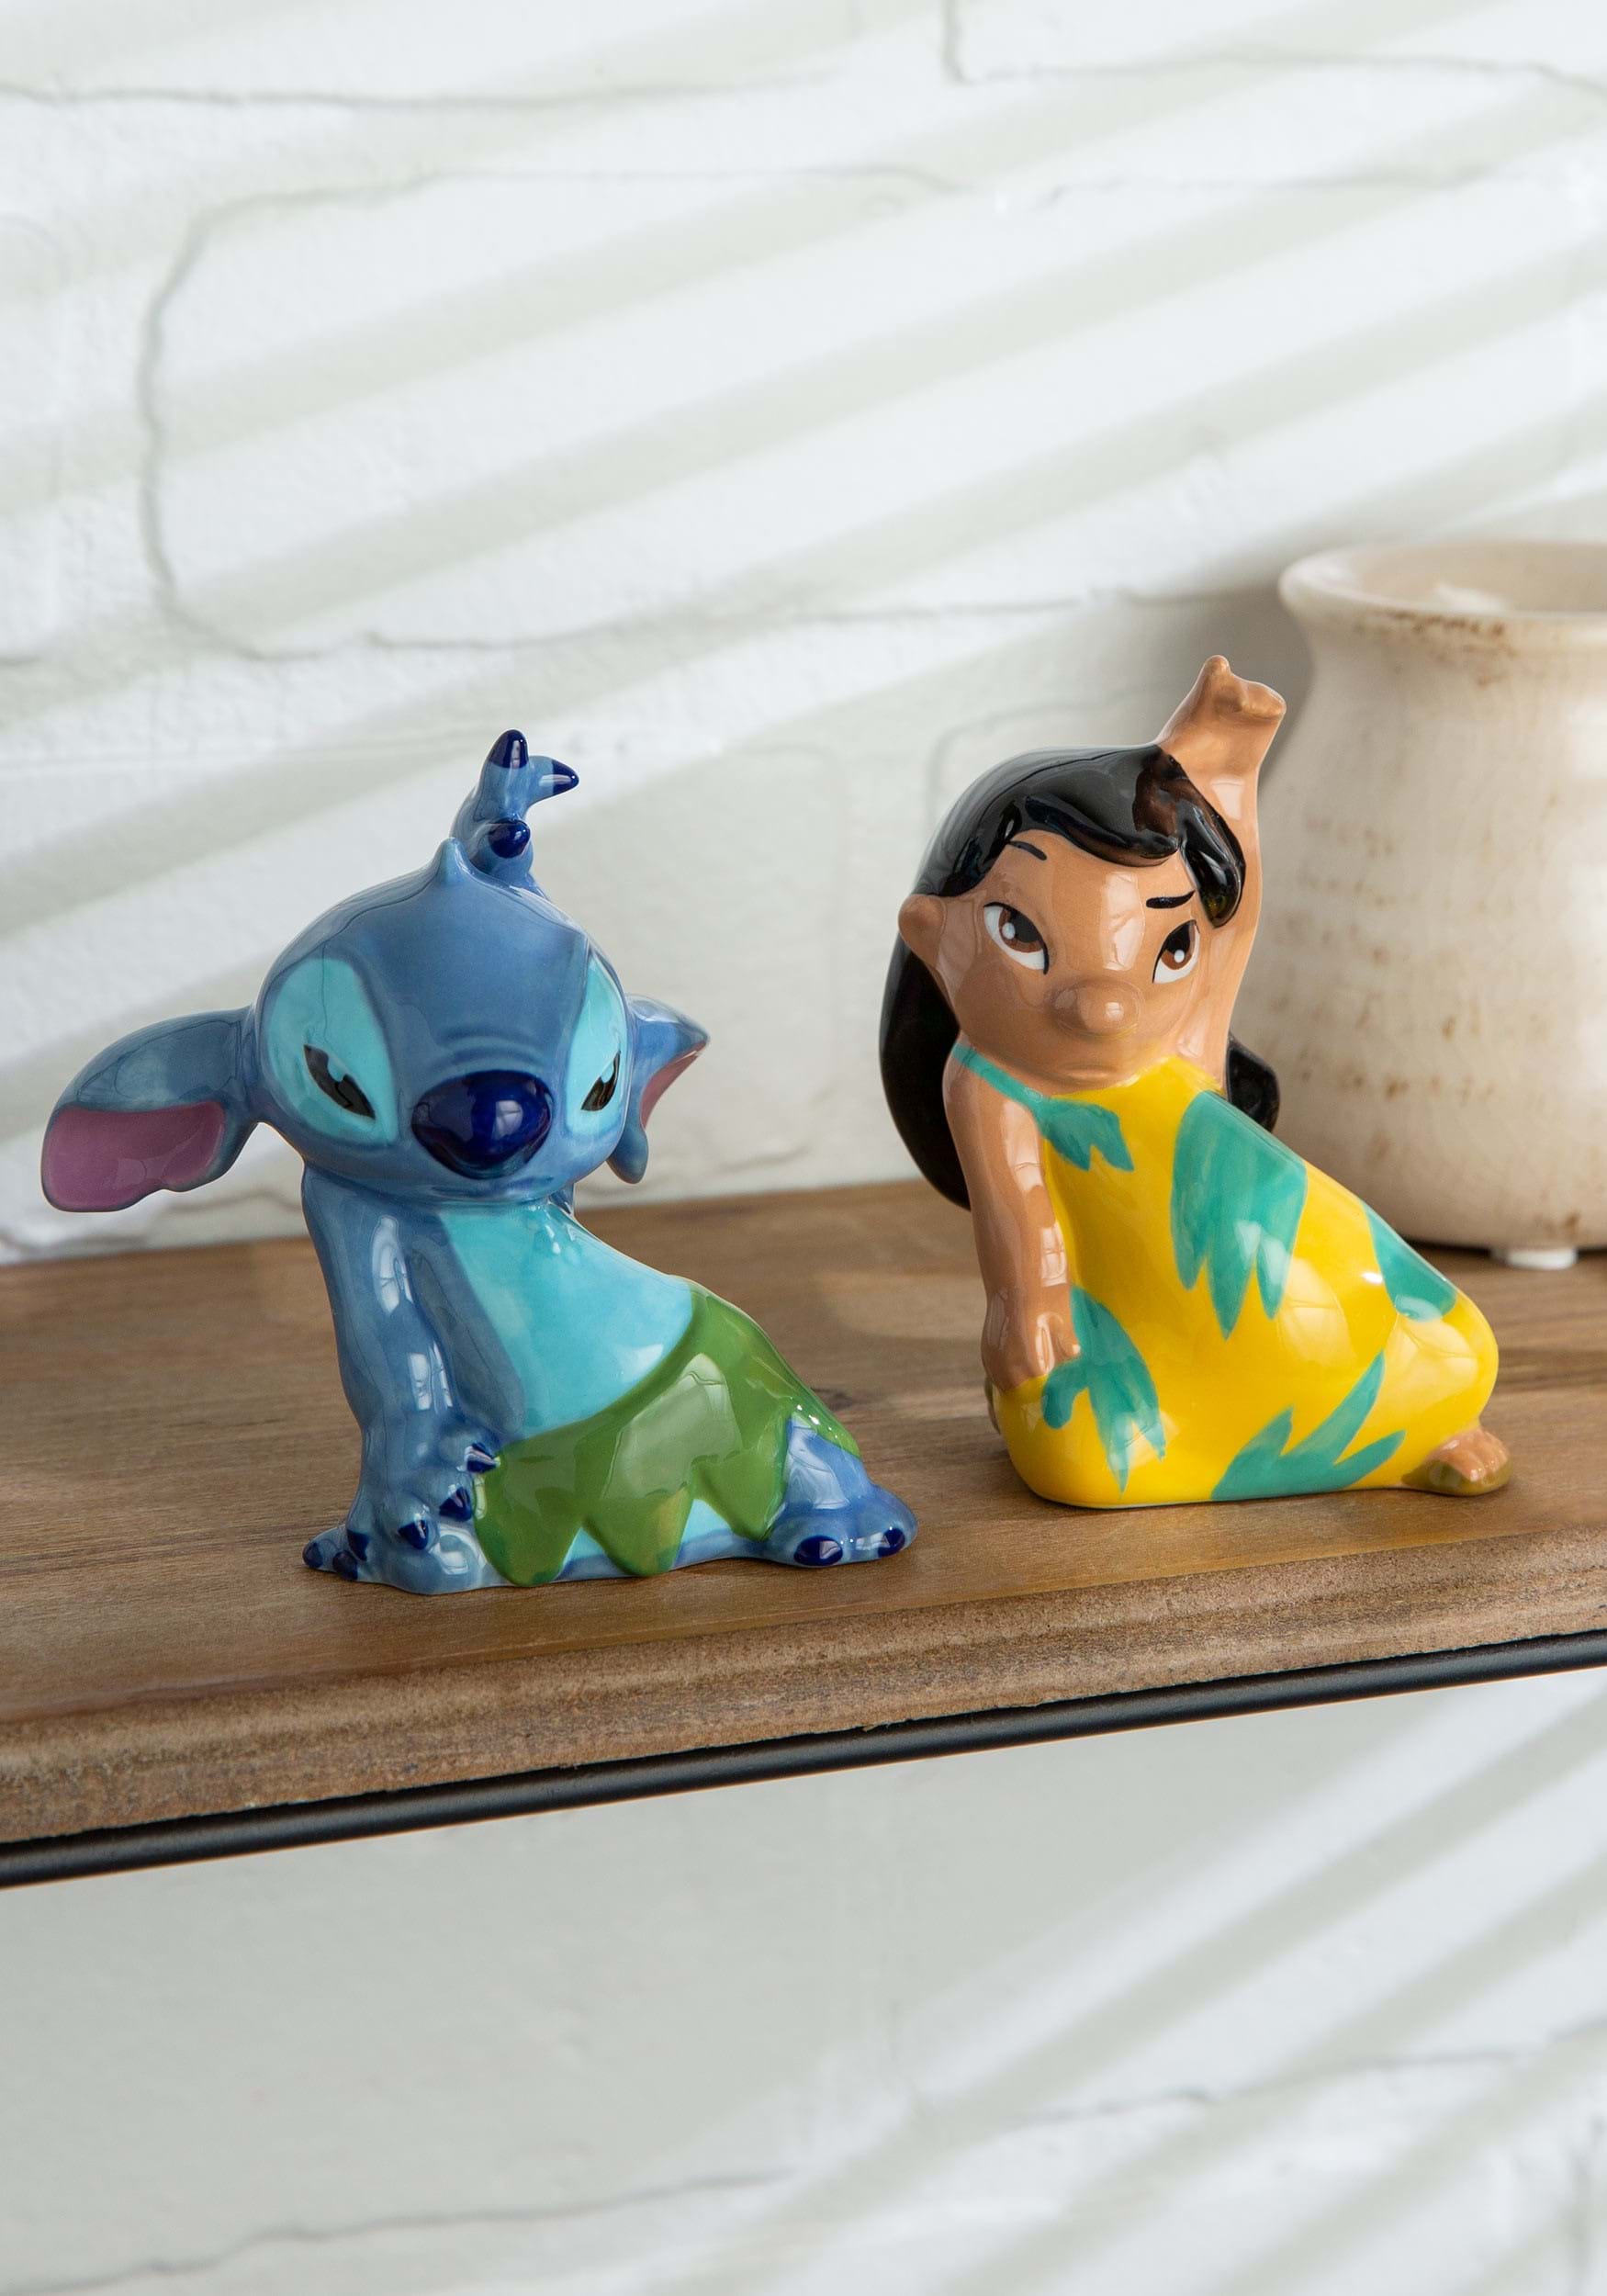 https://images.fun.com/products/57875/1-1/lilo-stitch-salt-and-pepper-shaker-set-update.jpg